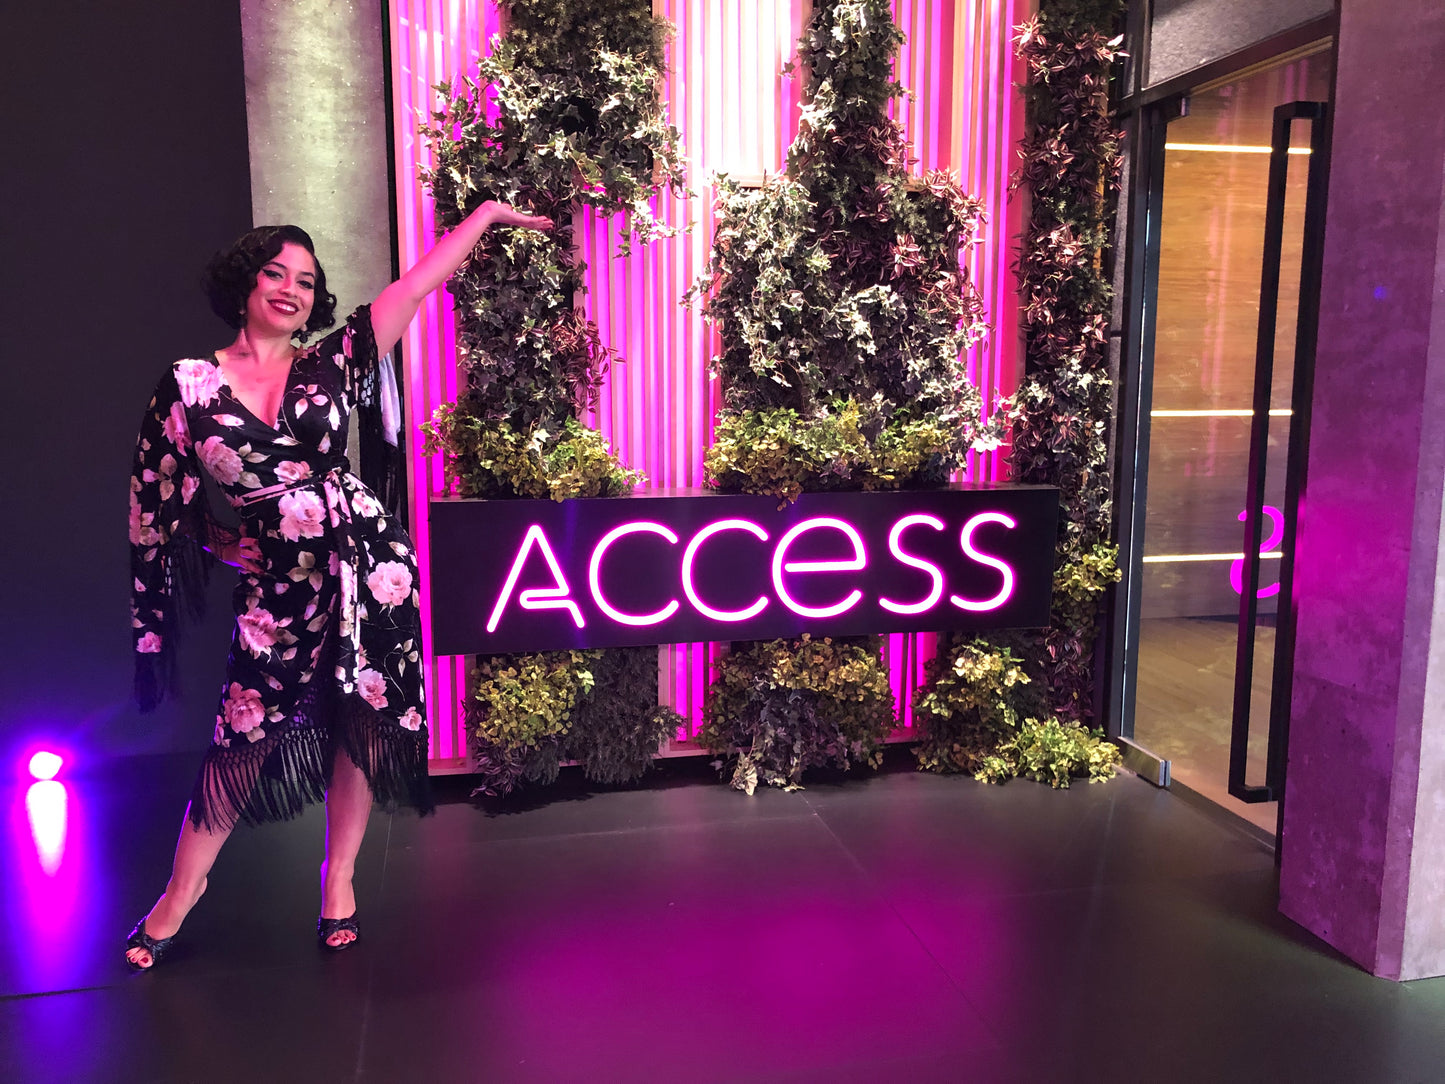 We made it to Access Hollywood!